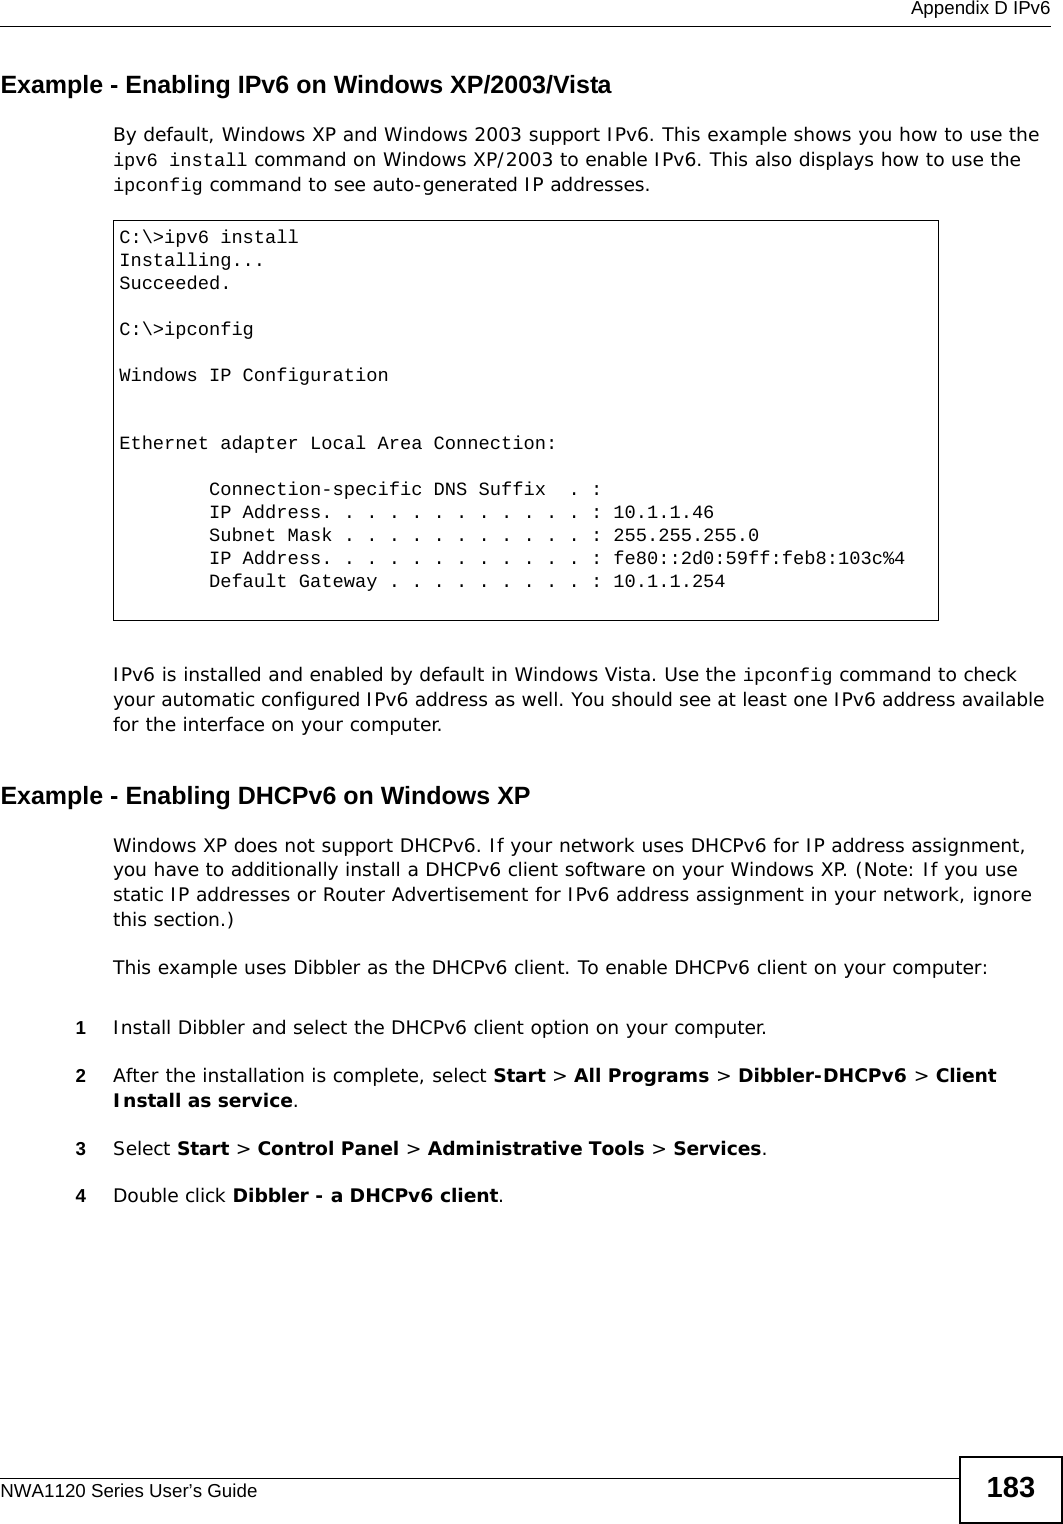  Appendix D IPv6NWA1120 Series User’s Guide 183Example - Enabling IPv6 on Windows XP/2003/VistaBy default, Windows XP and Windows 2003 support IPv6. This example shows you how to use the ipv6 install command on Windows XP/2003 to enable IPv6. This also displays how to use the ipconfig command to see auto-generated IP addresses.IPv6 is installed and enabled by default in Windows Vista. Use the ipconfig command to check your automatic configured IPv6 address as well. You should see at least one IPv6 address available for the interface on your computer.Example - Enabling DHCPv6 on Windows XPWindows XP does not support DHCPv6. If your network uses DHCPv6 for IP address assignment, you have to additionally install a DHCPv6 client software on your Windows XP. (Note: If you use static IP addresses or Router Advertisement for IPv6 address assignment in your network, ignore this section.)This example uses Dibbler as the DHCPv6 client. To enable DHCPv6 client on your computer:1Install Dibbler and select the DHCPv6 client option on your computer.2After the installation is complete, select Start &gt; All Programs &gt; Dibbler-DHCPv6 &gt; Client Install as service.3Select Start &gt; Control Panel &gt; Administrative Tools &gt; Services.4Double click Dibbler - a DHCPv6 client.C:\&gt;ipv6 installInstalling...Succeeded.C:\&gt;ipconfigWindows IP ConfigurationEthernet adapter Local Area Connection:        Connection-specific DNS Suffix  . :         IP Address. . . . . . . . . . . . : 10.1.1.46        Subnet Mask . . . . . . . . . . . : 255.255.255.0        IP Address. . . . . . . . . . . . : fe80::2d0:59ff:feb8:103c%4        Default Gateway . . . . . . . . . : 10.1.1.254